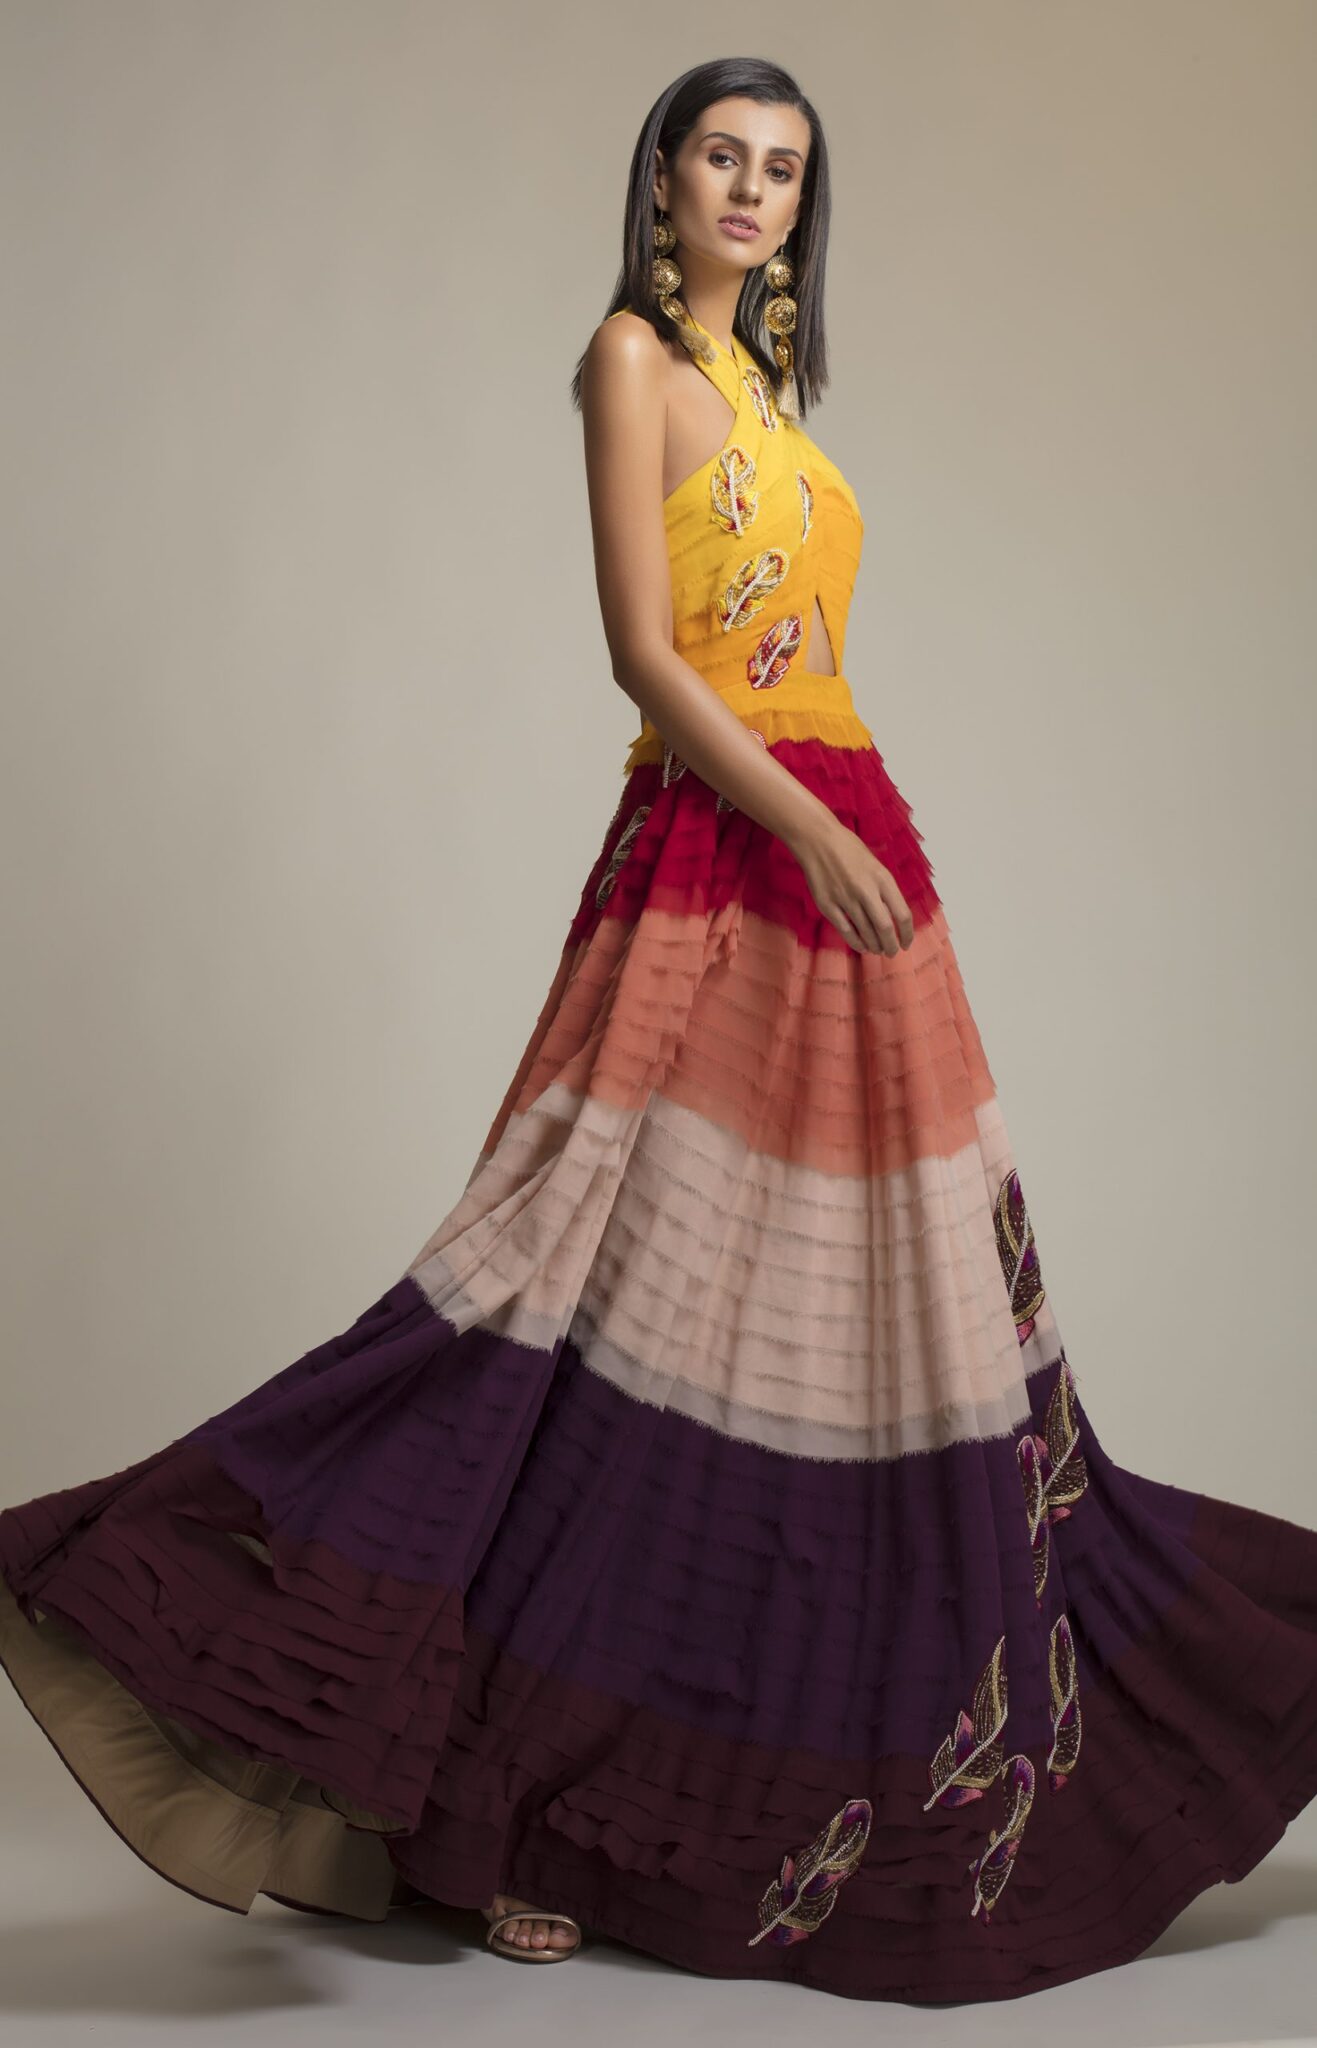 Folklore Collections -  rainbow layred gown 2,  designer occasion wear,
designer wear clothes,
indian designer wear online,
special occasion wear, 
Fashion designer clothing,
women designer clothing
